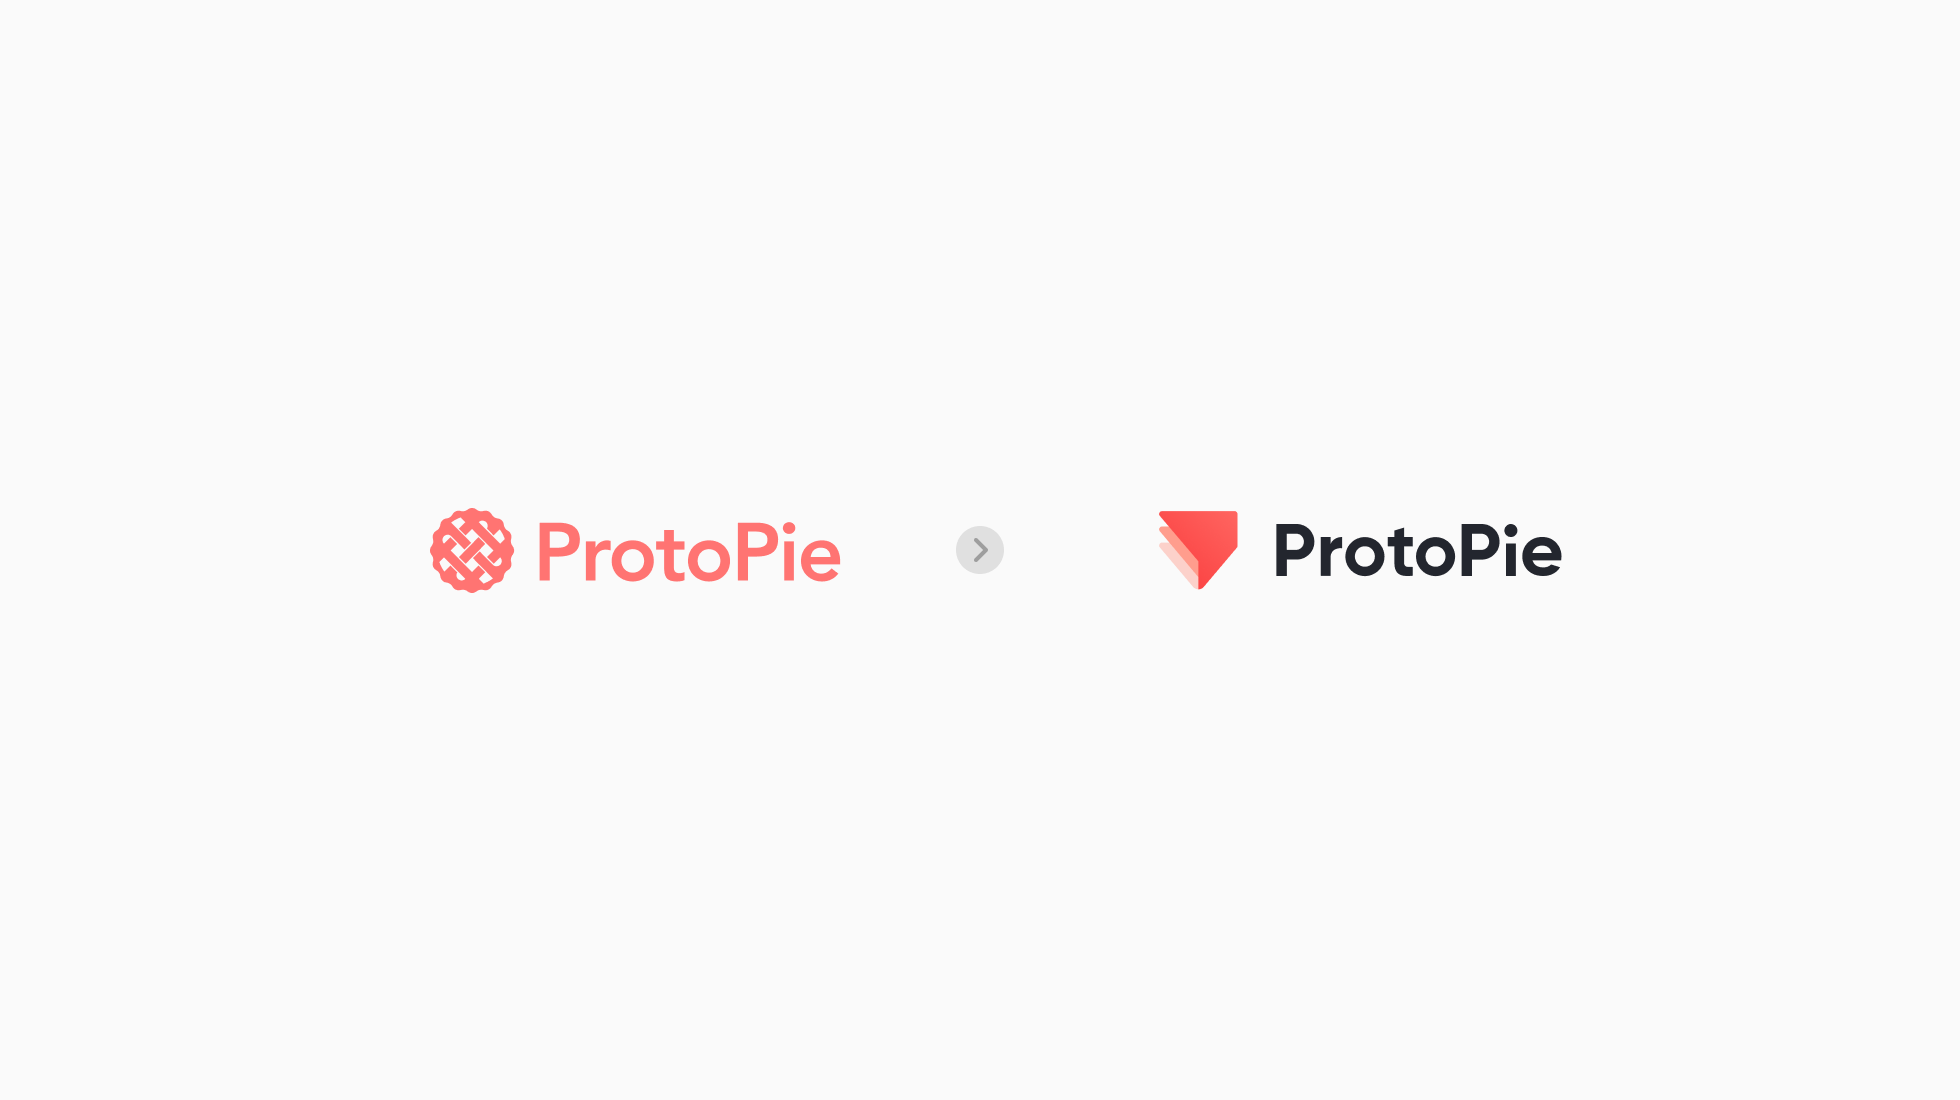 ProtoPie logo before and after